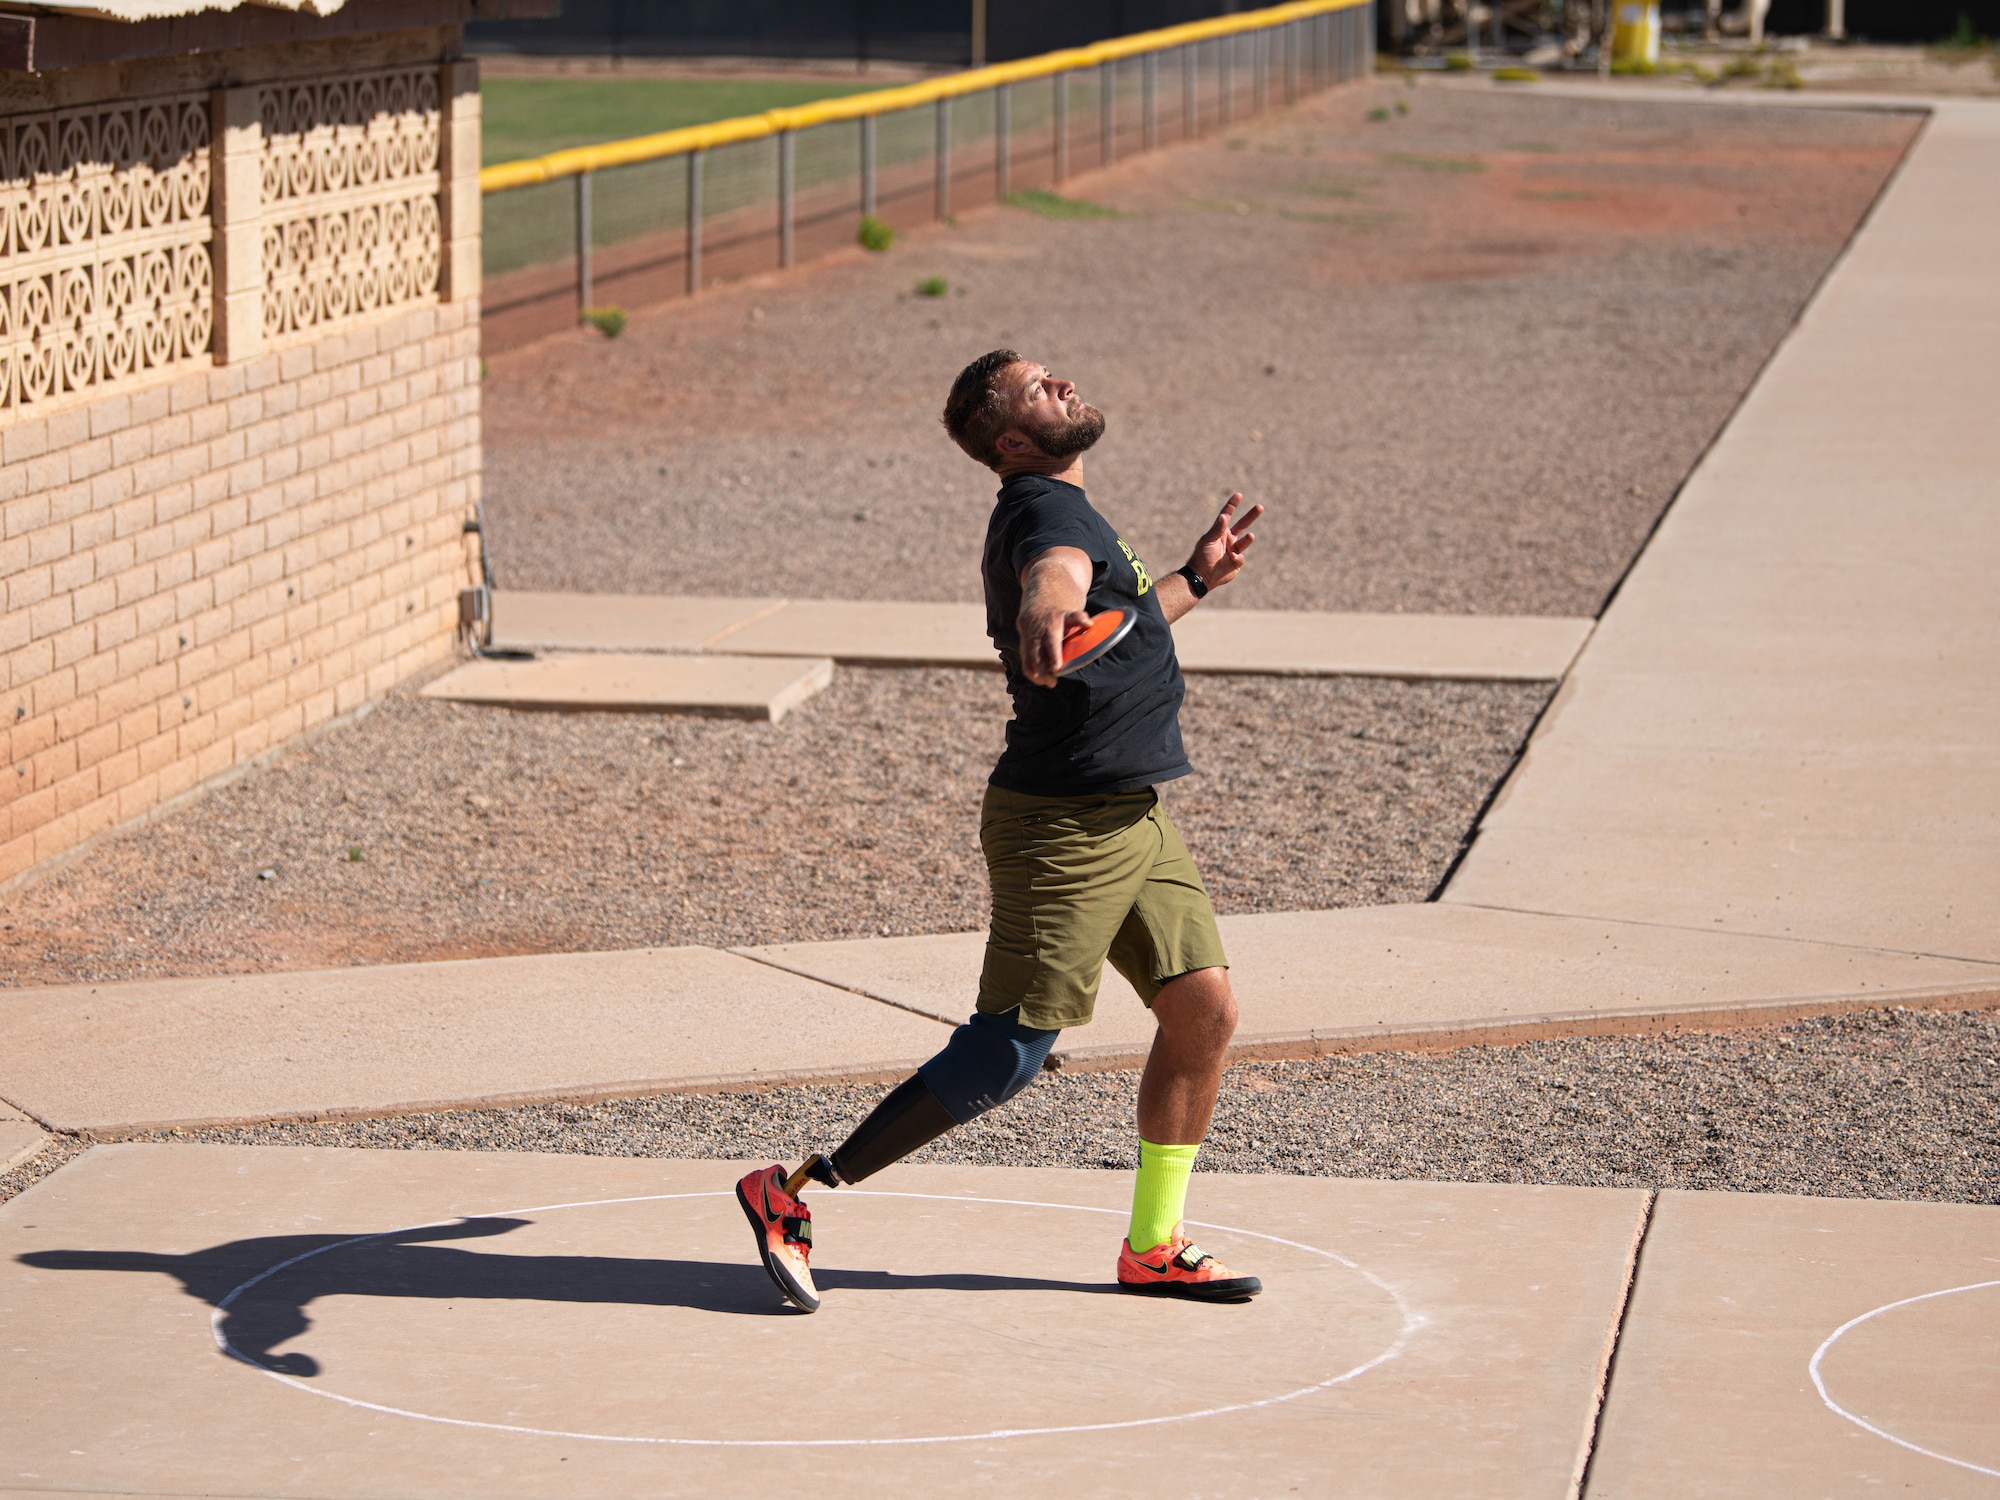 Retired U.S. Navy Petty Officer Third Class Max Rhome throws a discus May 27, 2021, at Luke Air Force Base, Arizona.